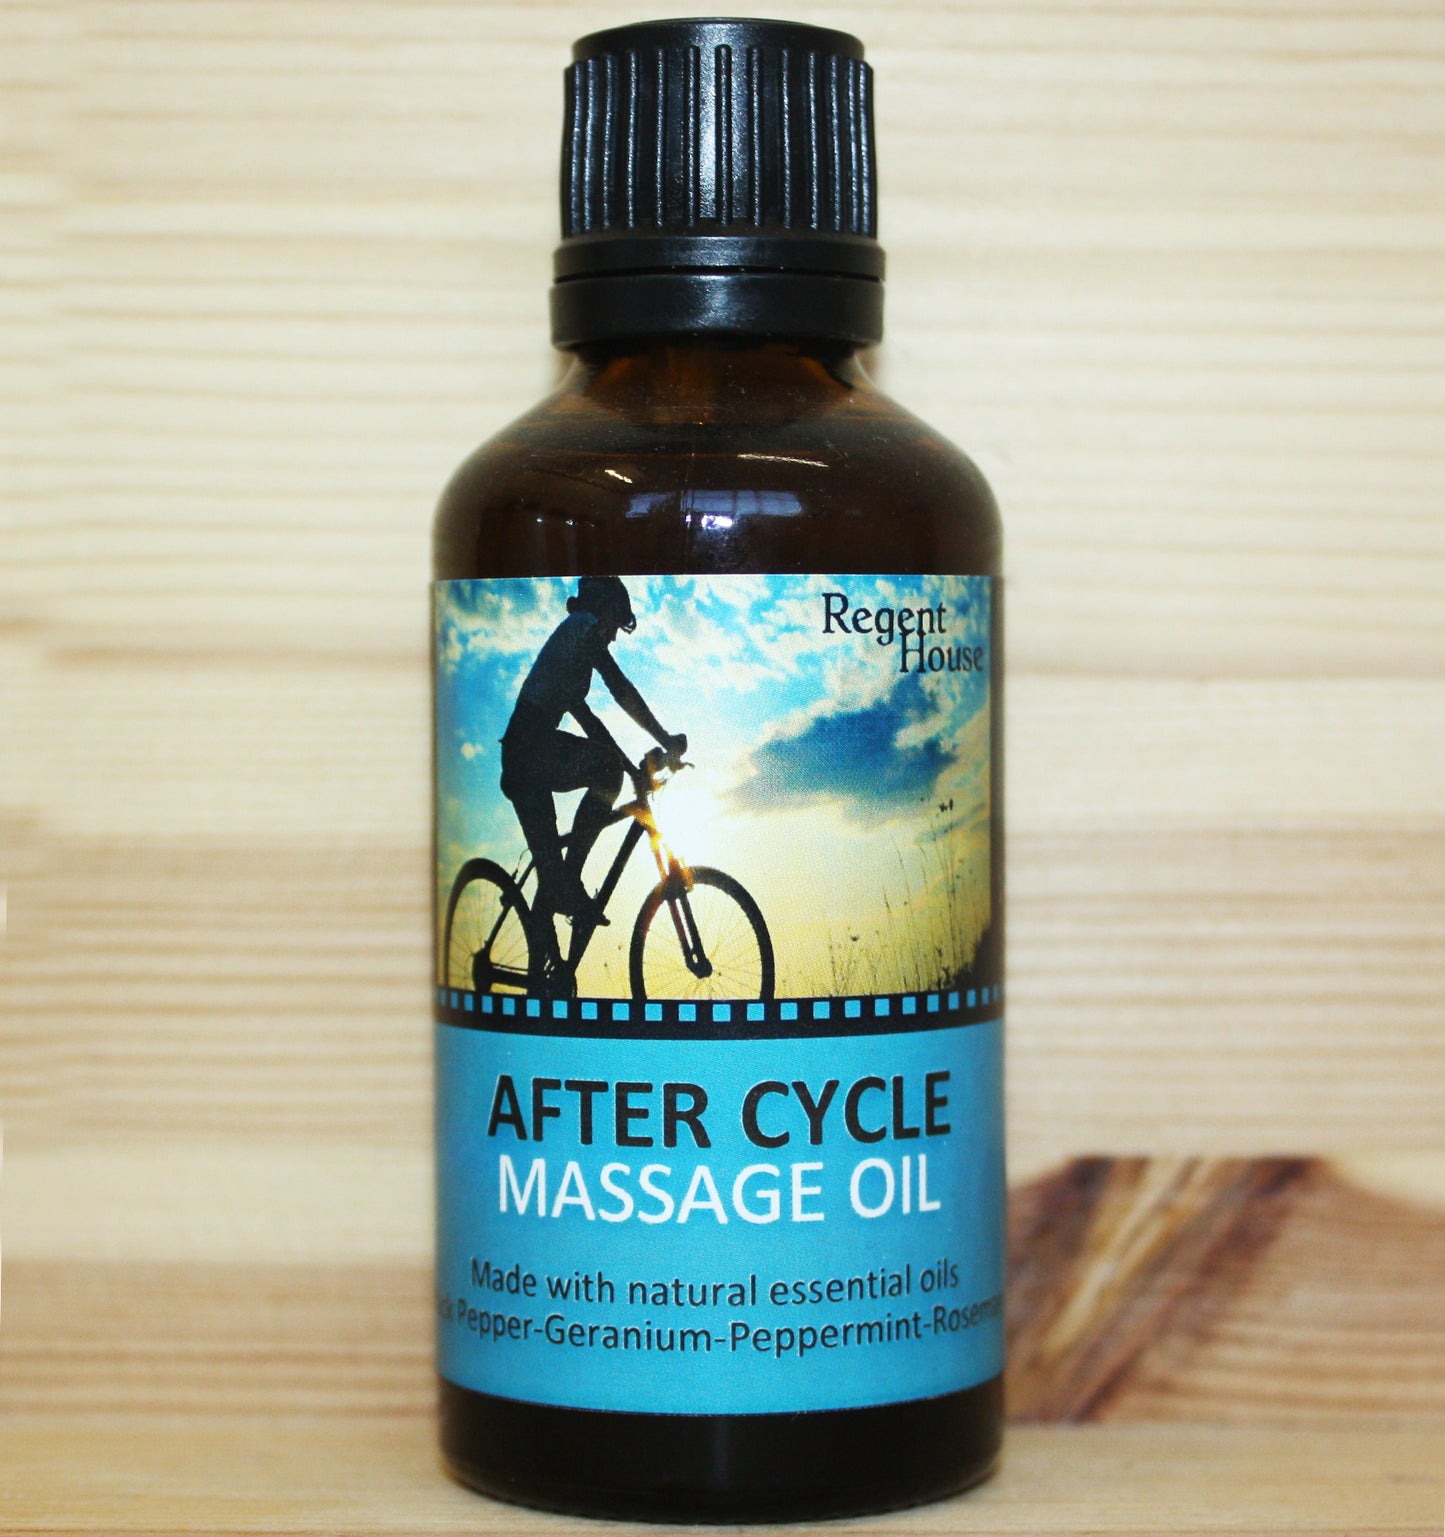 After Cycle Massage Oil